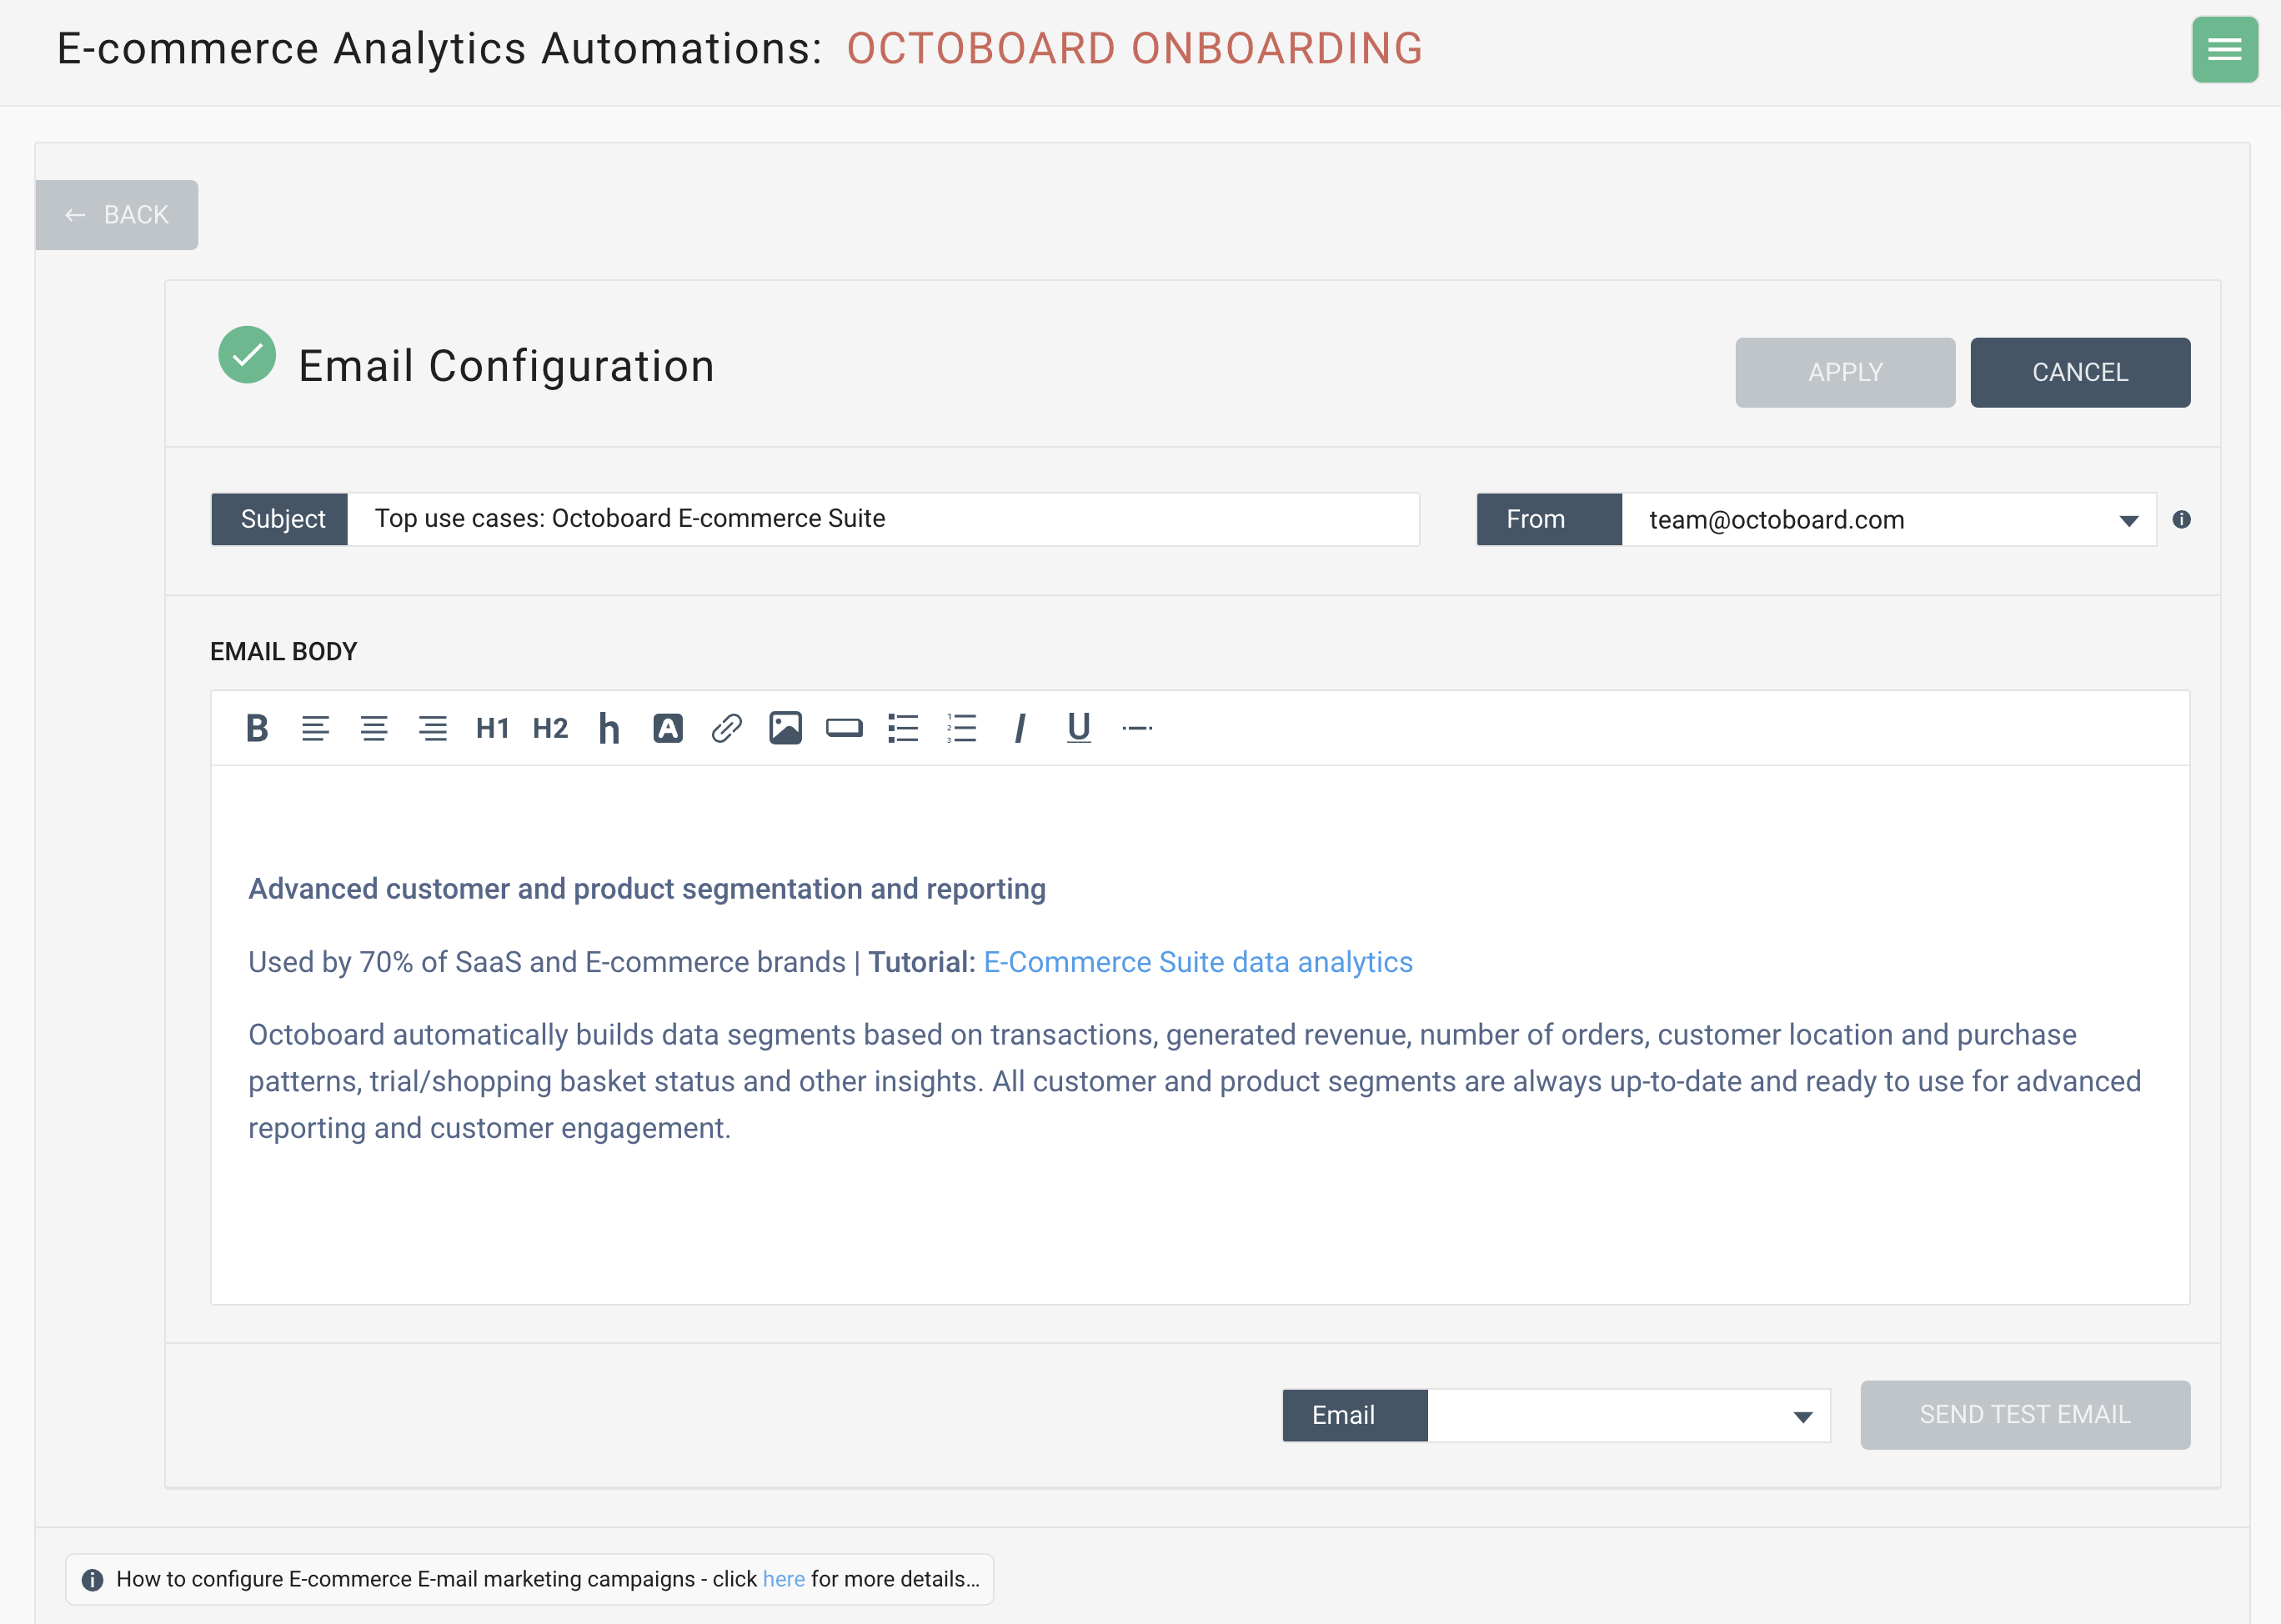 Sample email configuration